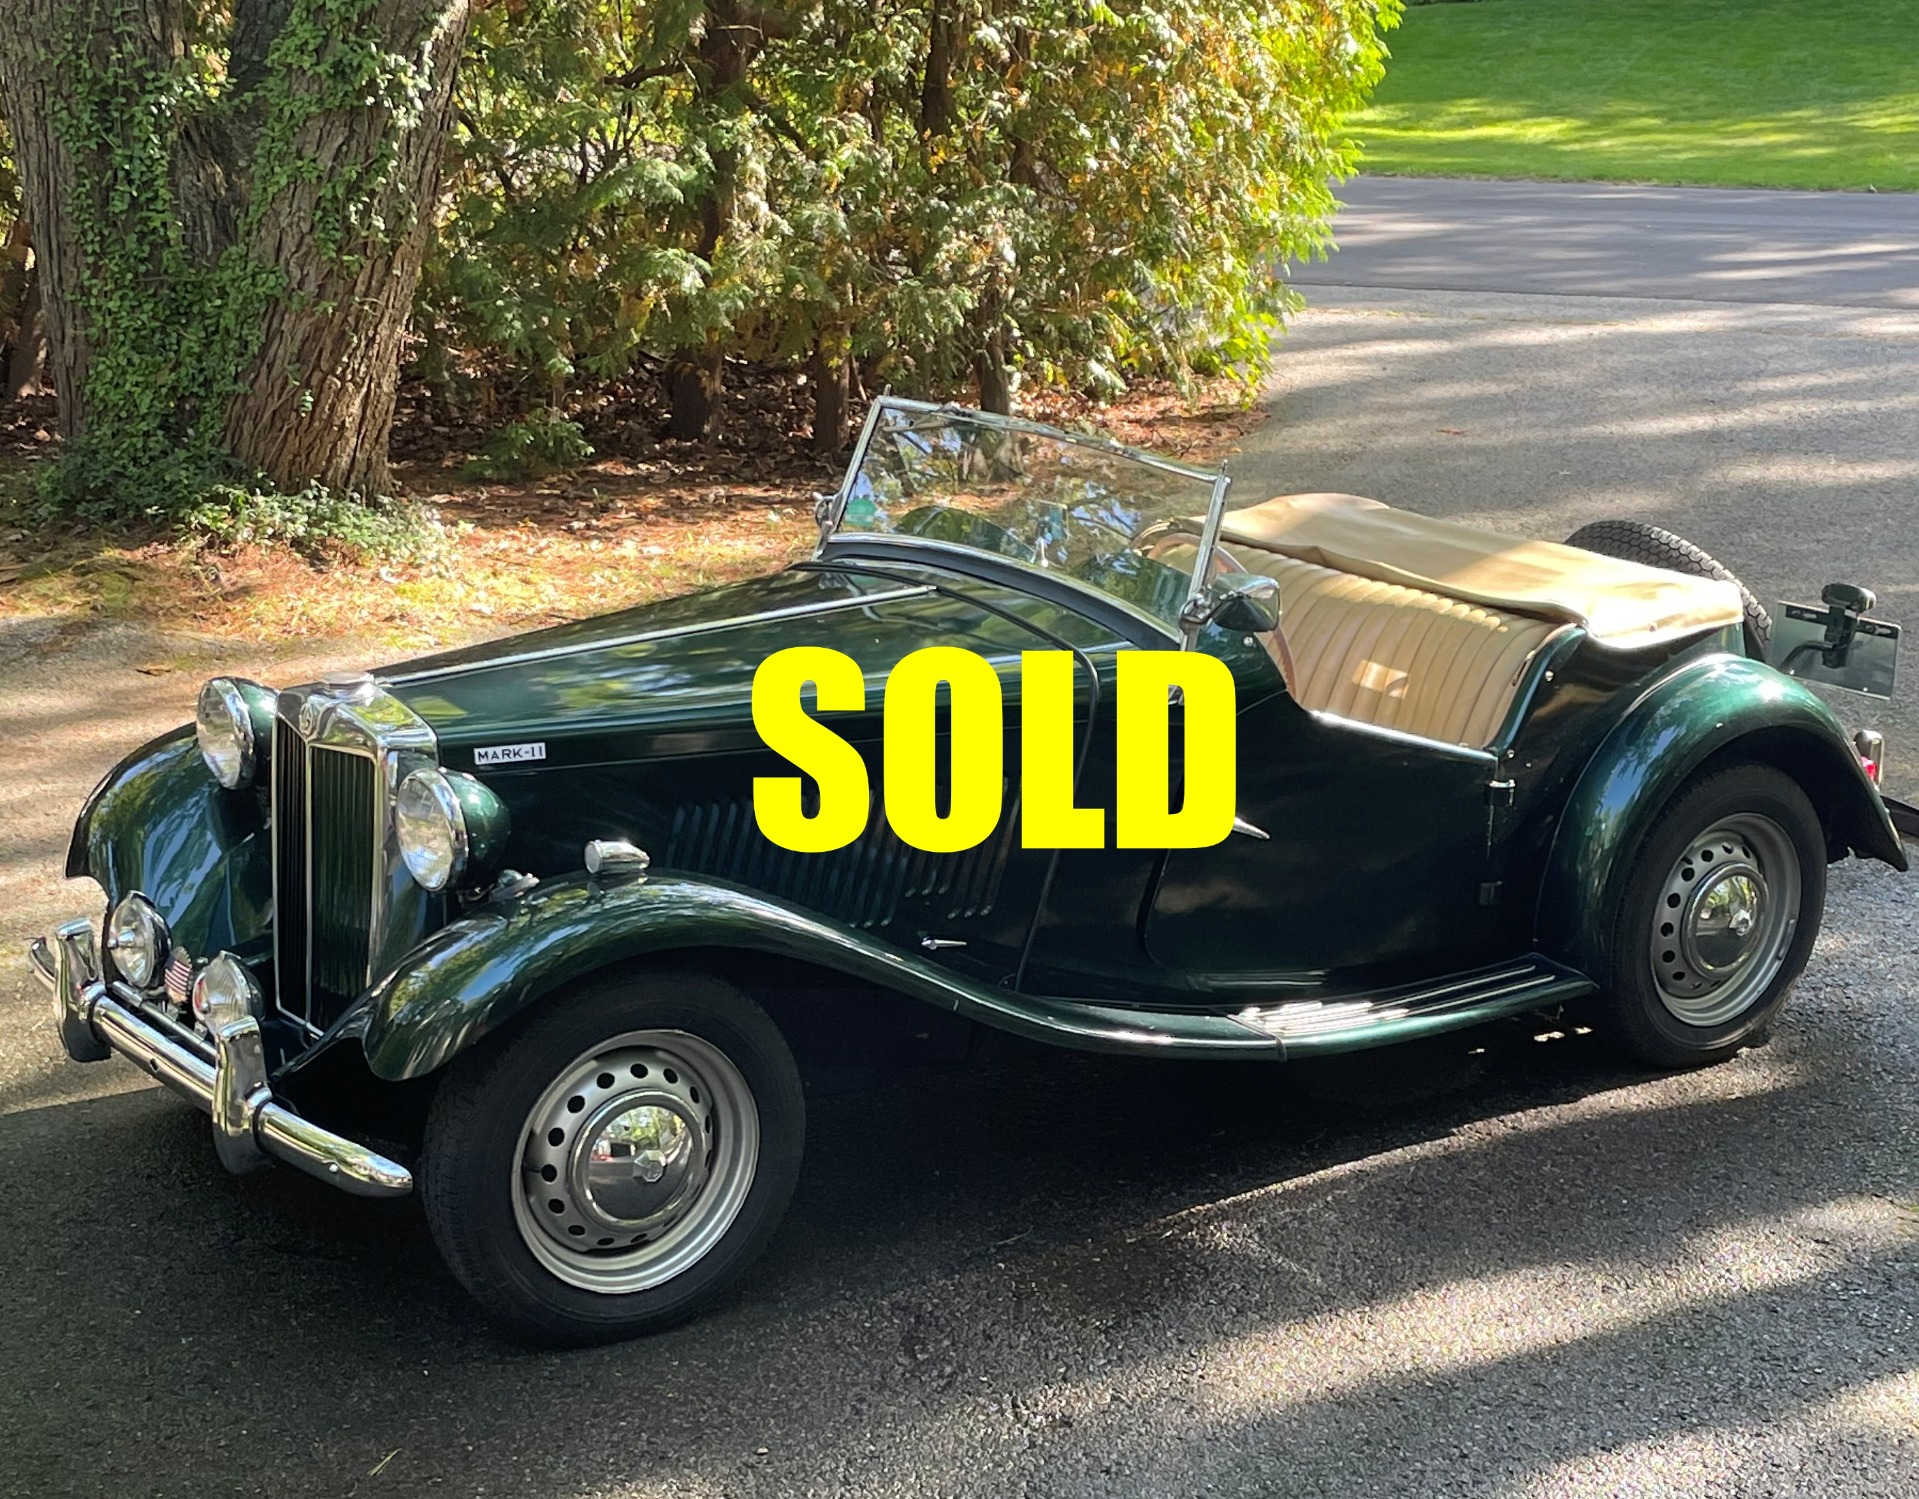 Used 1953 MGTD Mark II Competition  219 , For Sale $37500, Call Us: (704) 996-3735